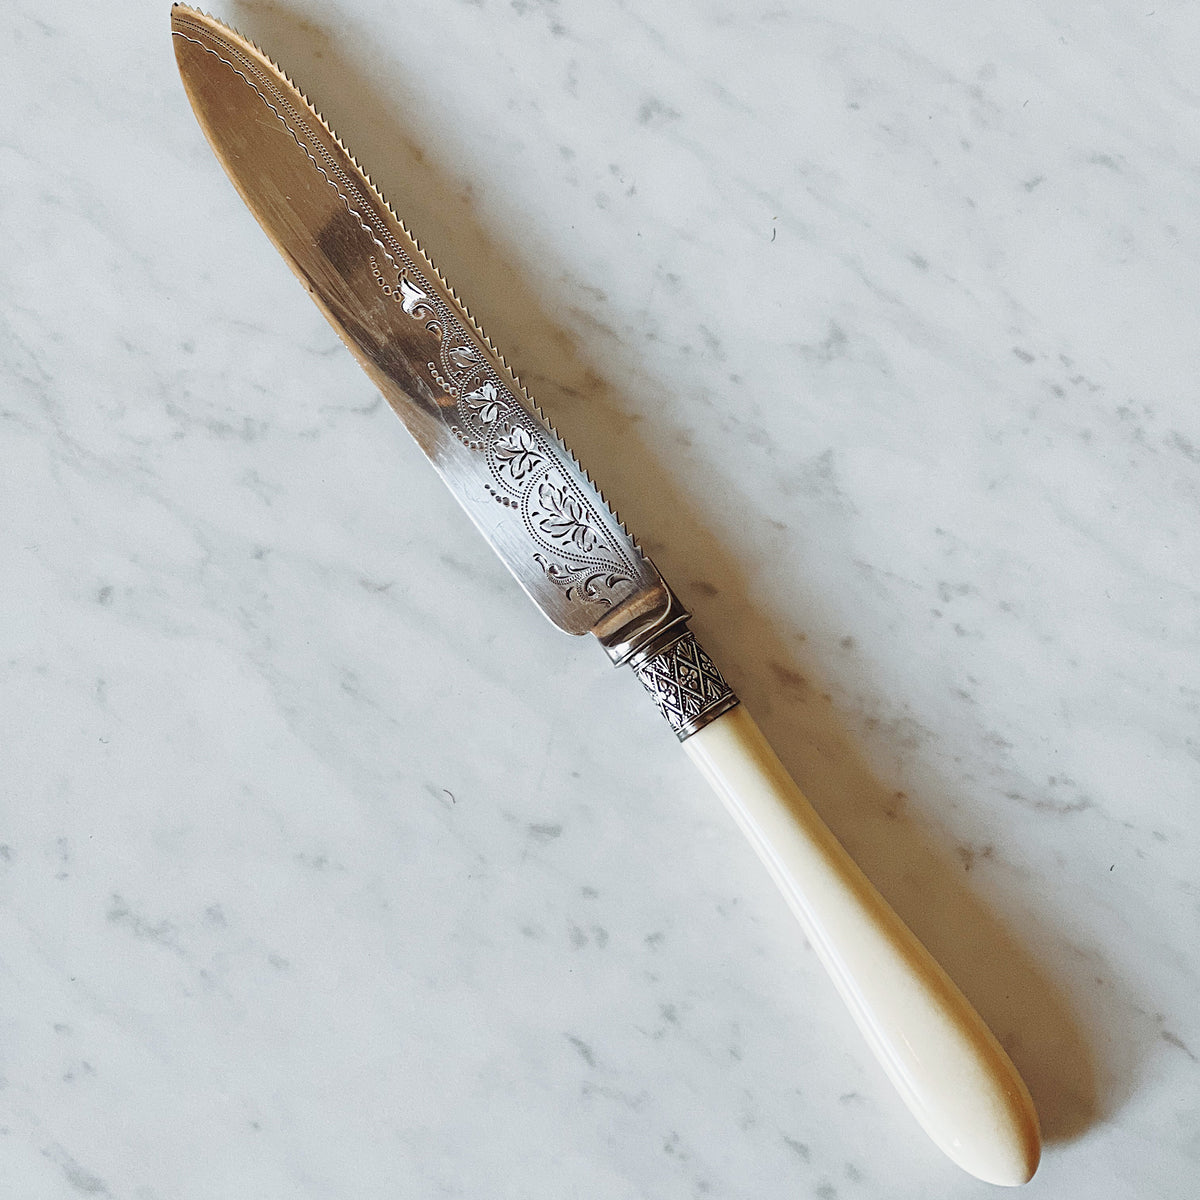 Antique Silver-Plate Cake Knife with Bone Handle